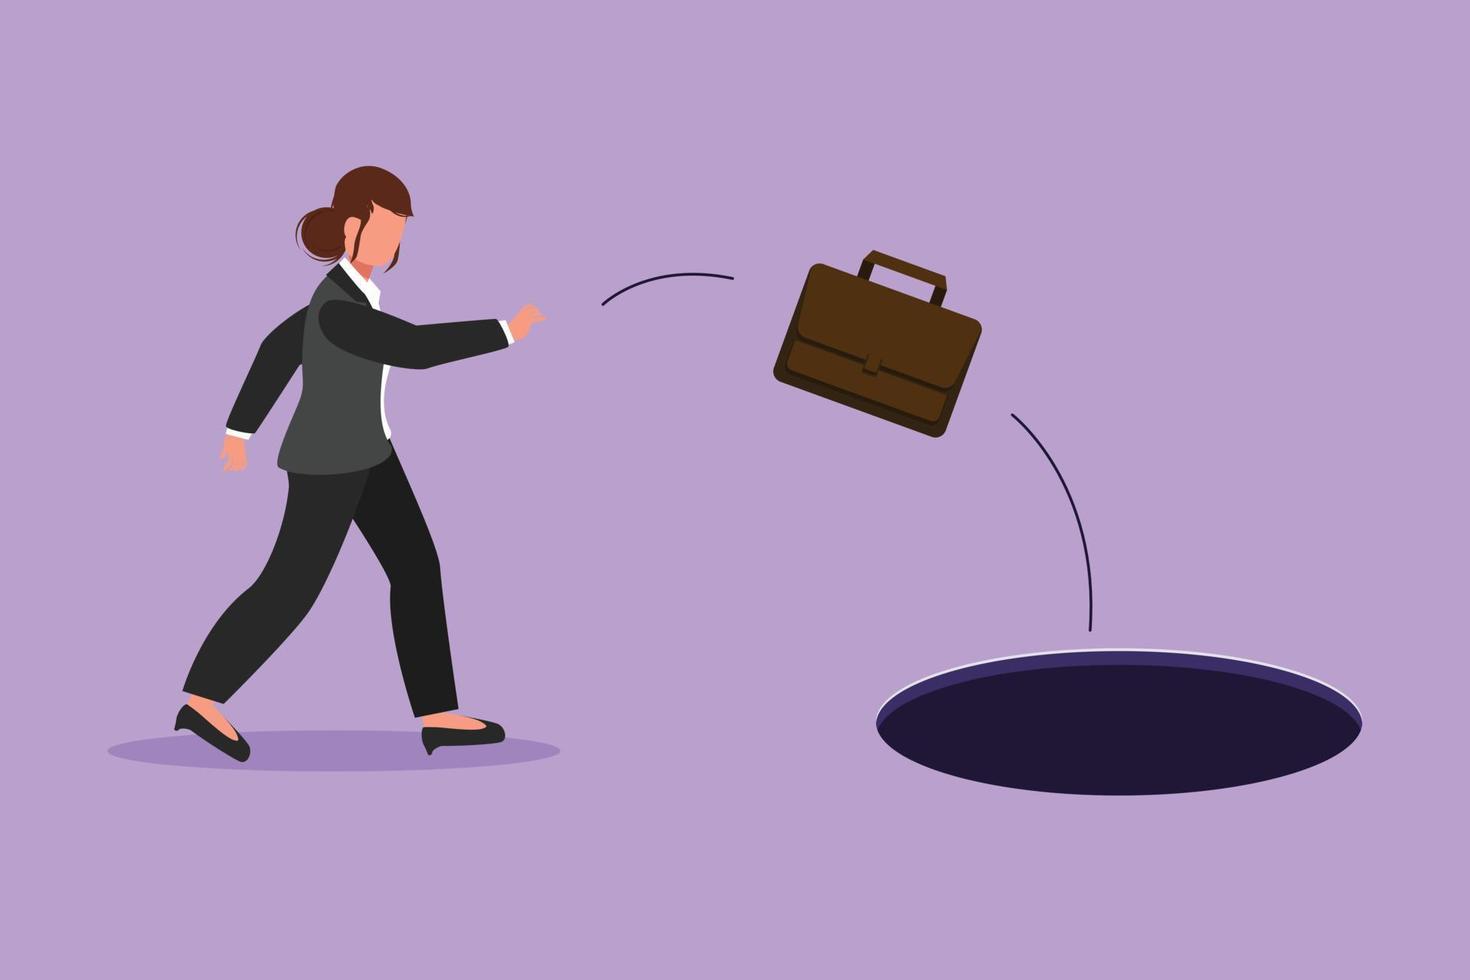 Cartoon flat style drawing businesswoman throws briefcase into hole. Failure to take advantage of business opportunities. Frustrated worker due to financial crisis. Graphic design vector illustration